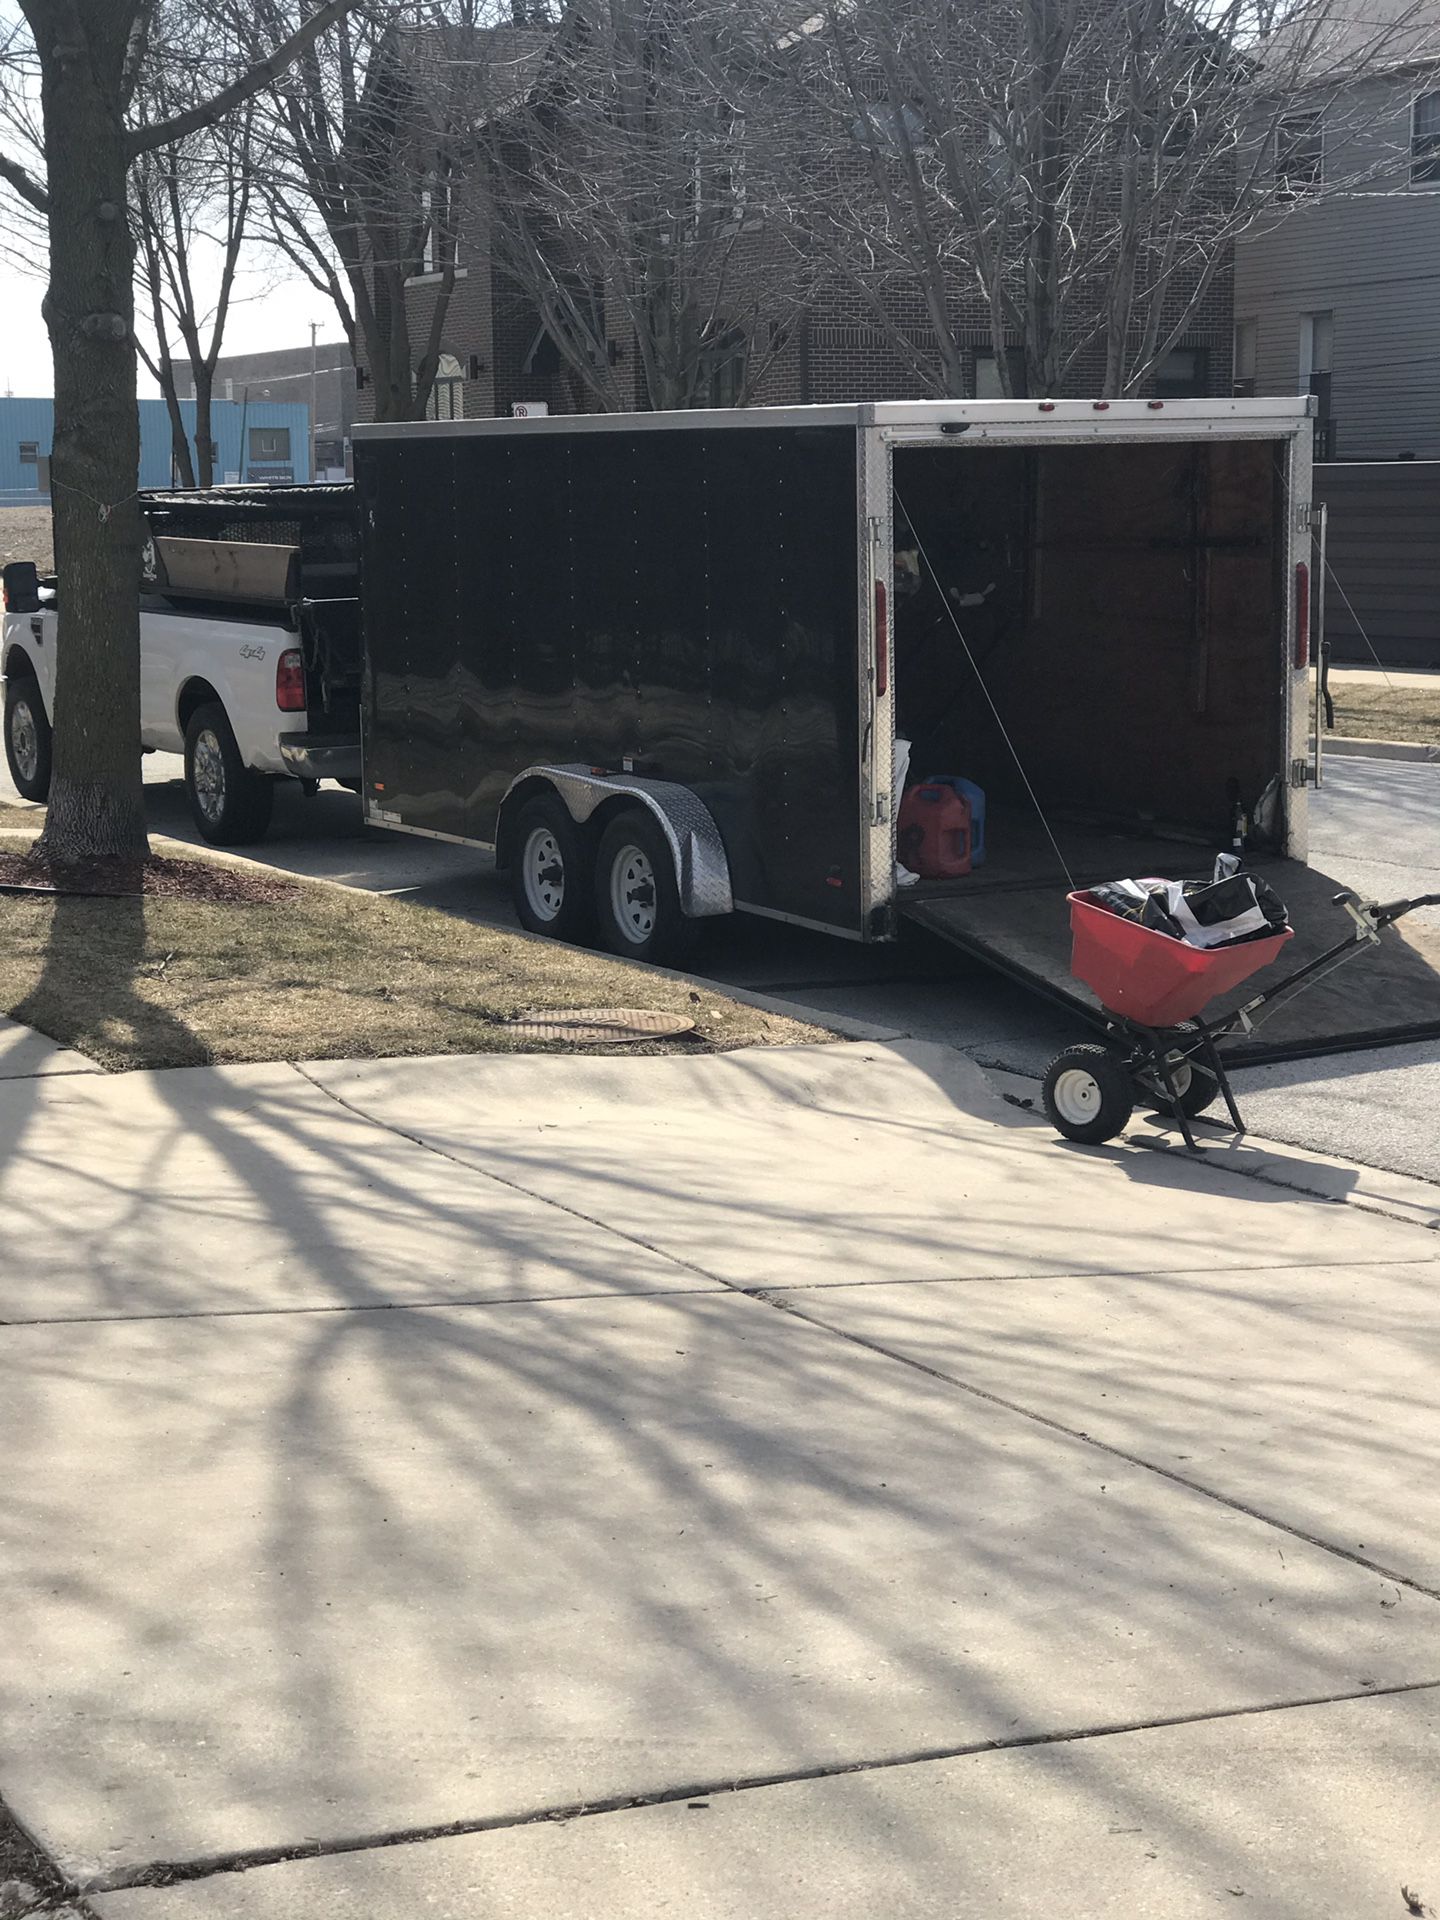 rc trailer 7x16 enclosed trailer 2016 purchased brand new , clean title and currently registered /plated well over $6k new